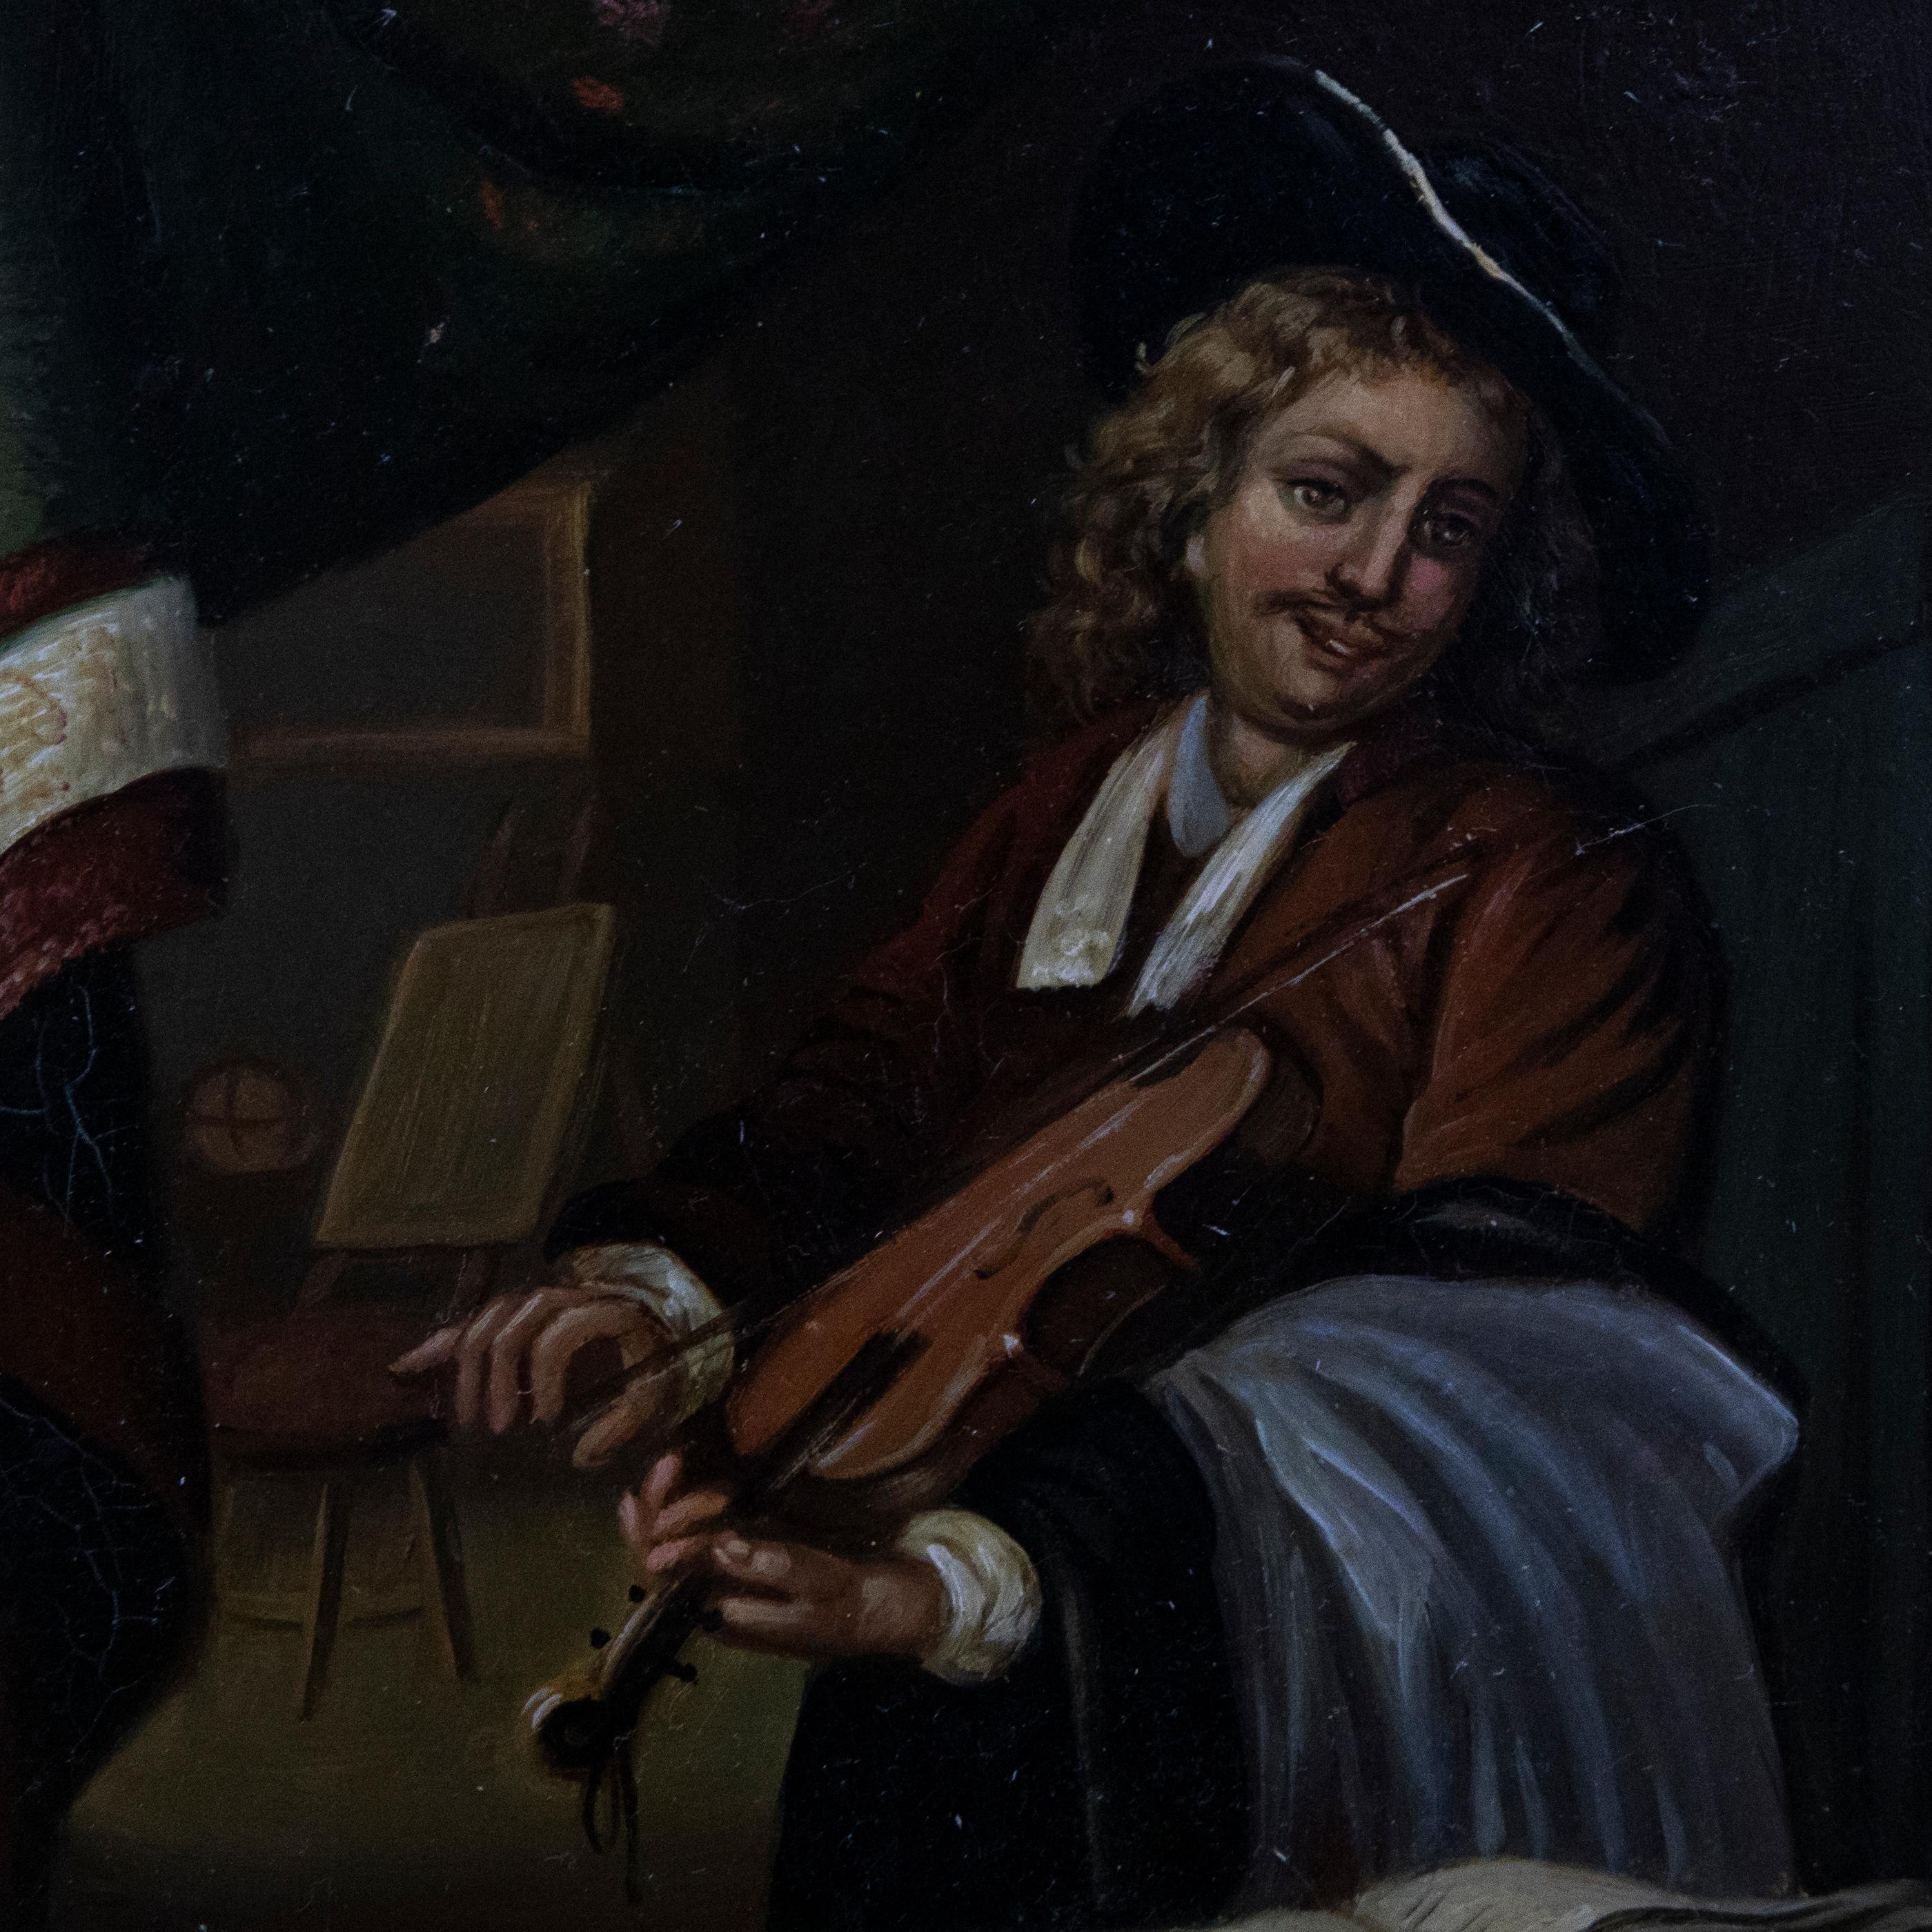 A fine 20th Century copy of the original 1665 painting by Gerrit Dou. The artist has inscribed 